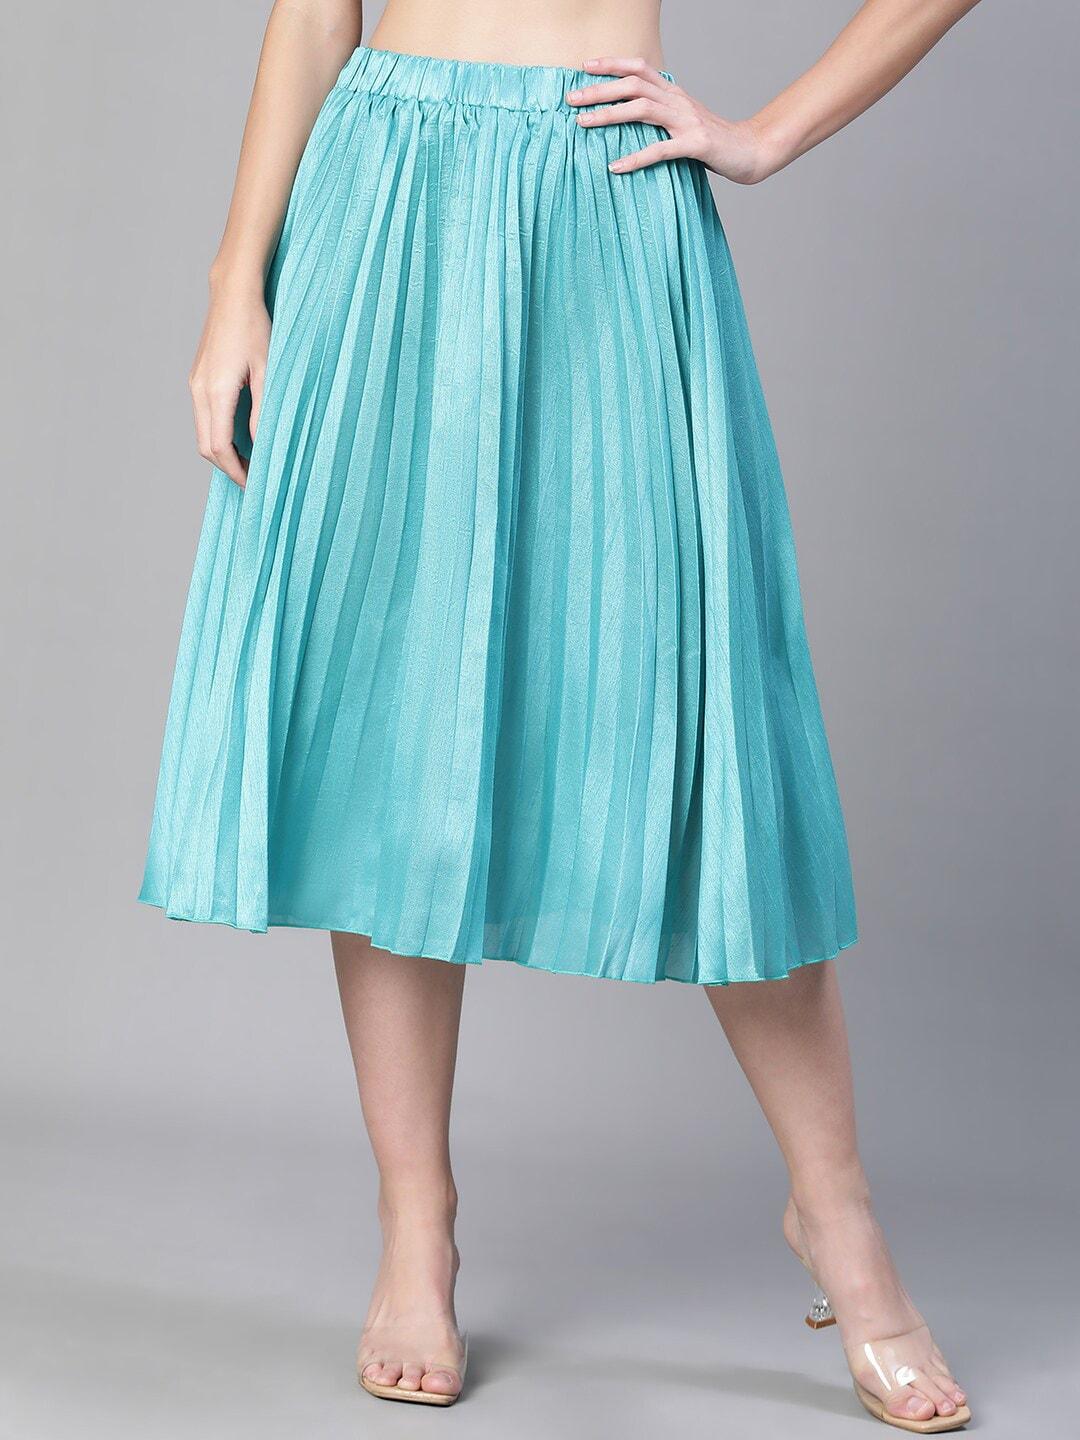 oxolloxo accordion pleated knee-length flared skirts